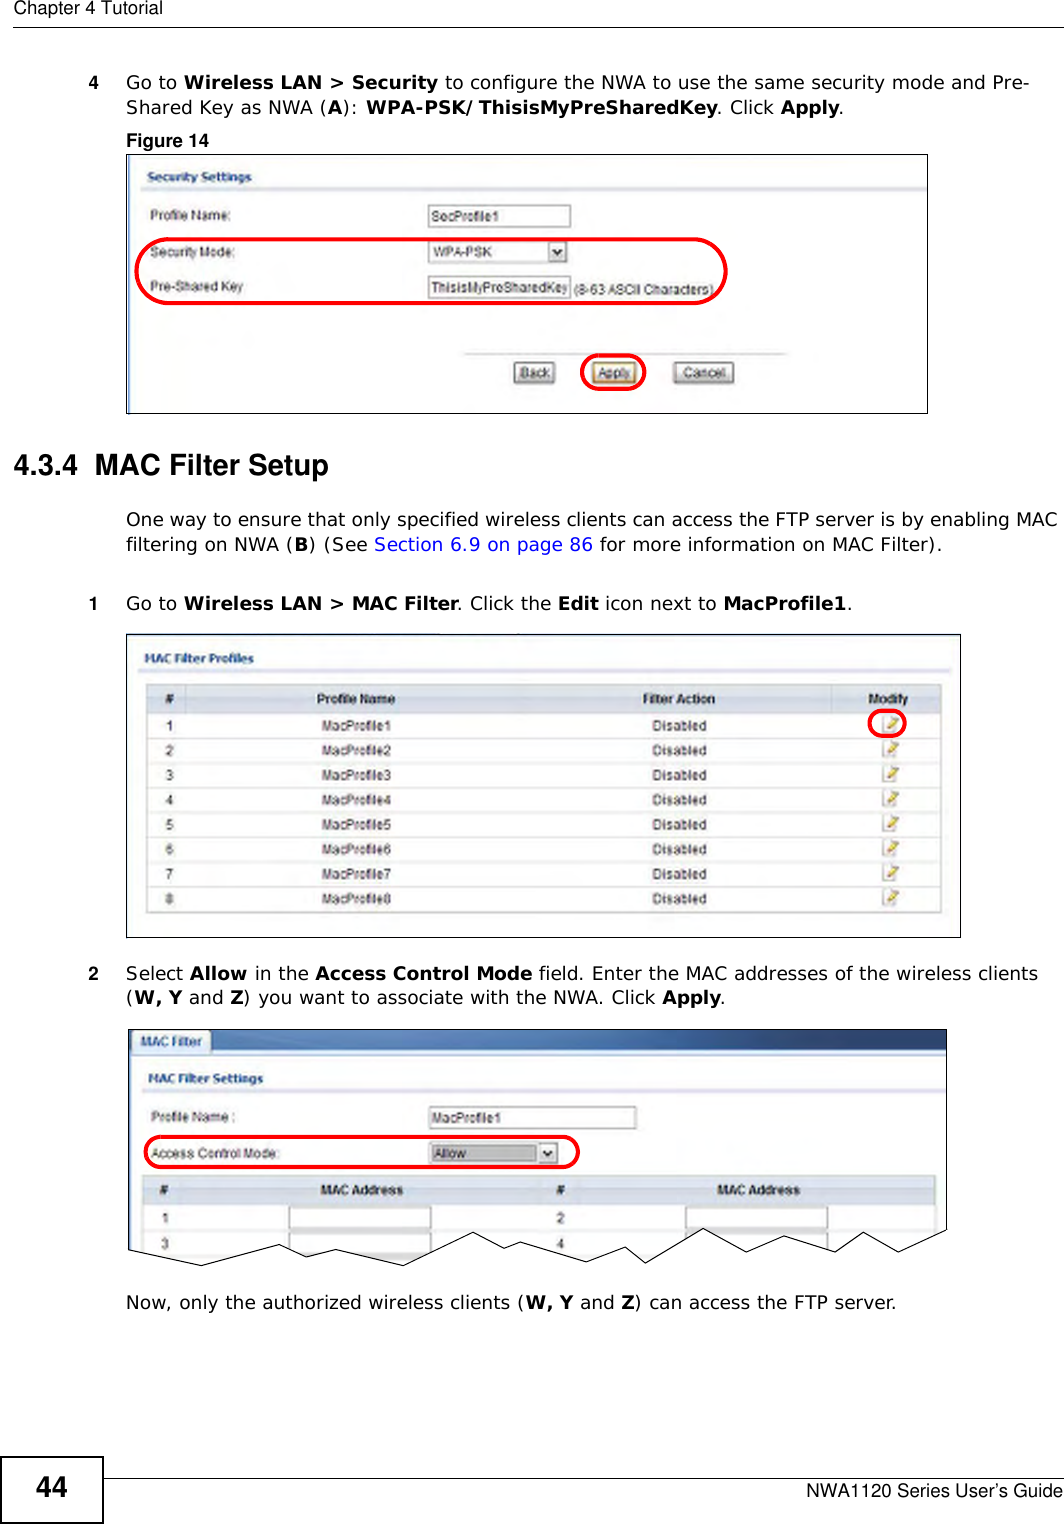 Chapter 4 TutorialNWA1120 Series User’s Guide444Go to Wireless LAN &gt; Security to configure the NWA to use the same security mode and Pre-Shared Key as NWA (A): WPA-PSK/ThisisMyPreSharedKey. Click Apply.Figure 14   4.3.4  MAC Filter SetupOne way to ensure that only specified wireless clients can access the FTP server is by enabling MAC filtering on NWA (B) (See Section 6.9 on page 86 for more information on MAC Filter).1Go to Wireless LAN &gt; MAC Filter. Click the Edit icon next to MacProfile1.2Select Allow in the Access Control Mode field. Enter the MAC addresses of the wireless clients (W, Y and Z) you want to associate with the NWA. Click Apply.Now, only the authorized wireless clients (W, Y and Z) can access the FTP server. 